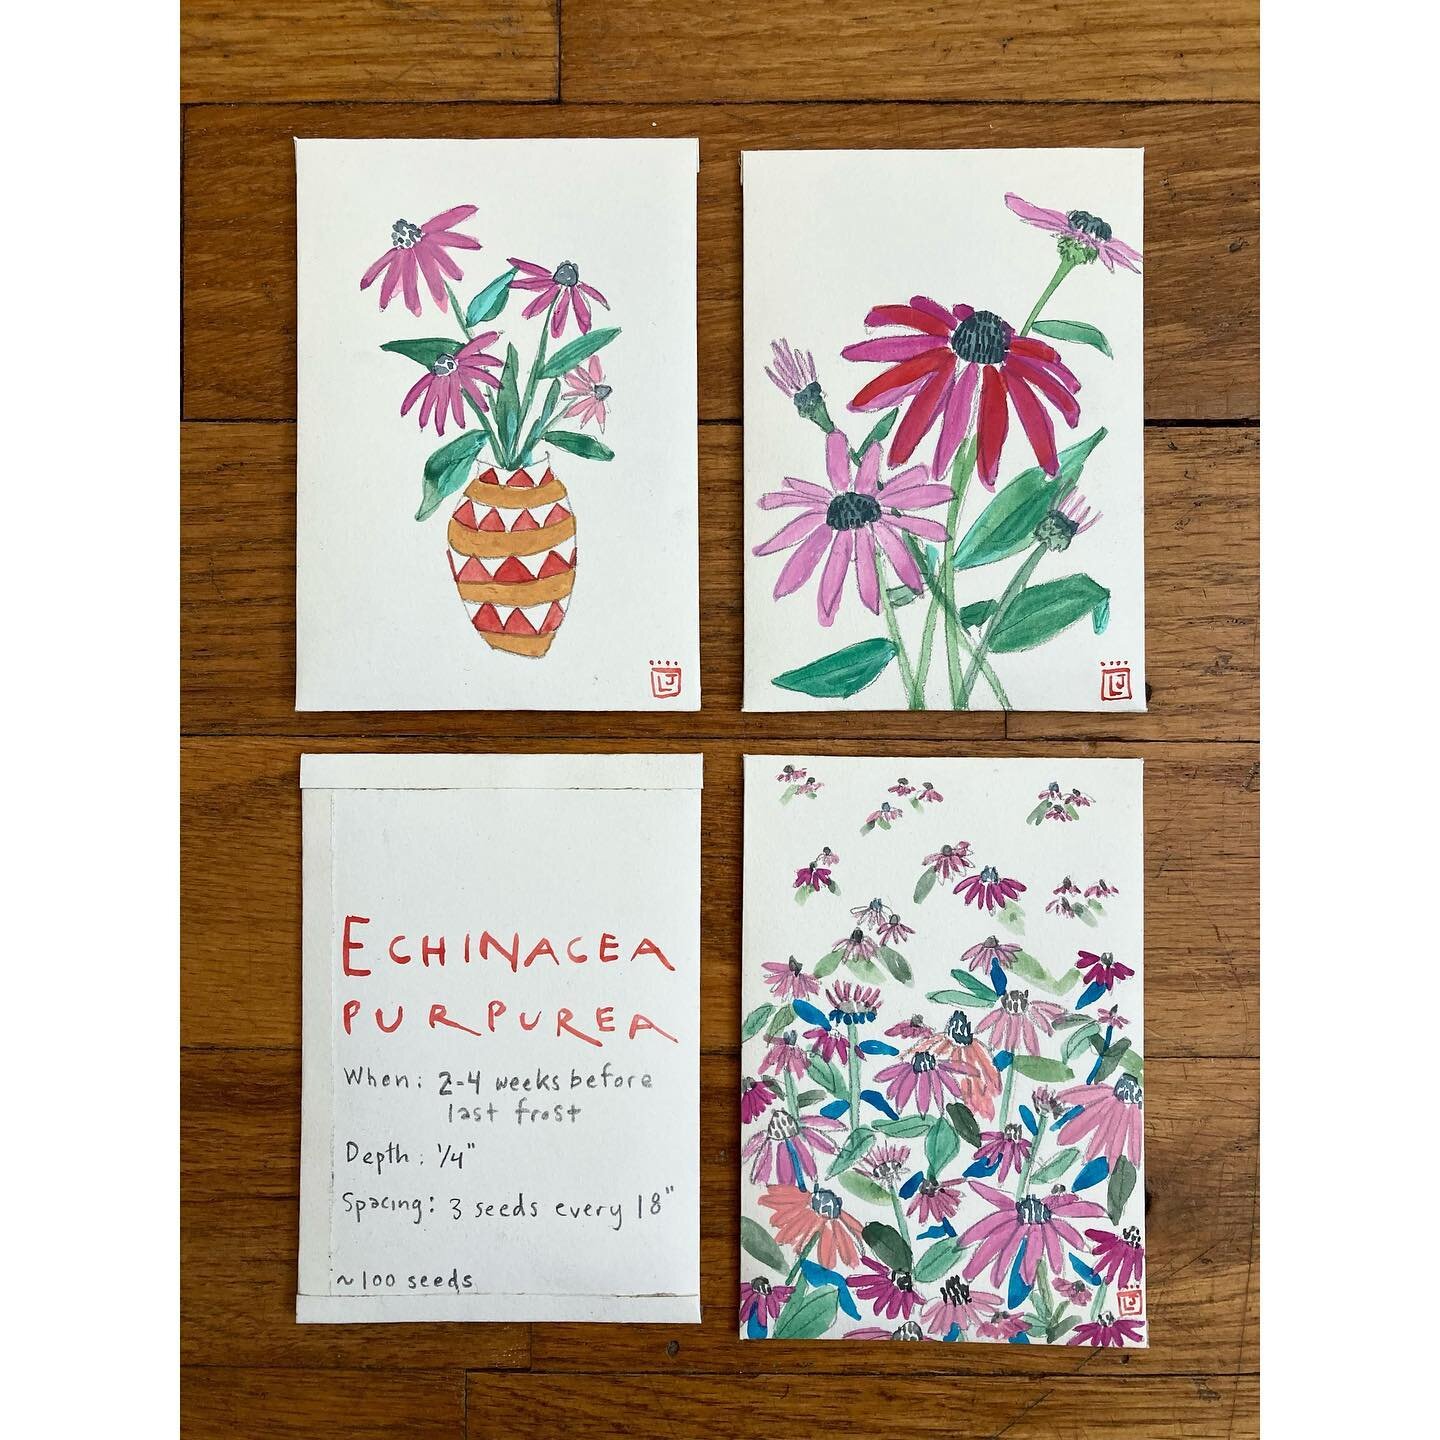 Echinacea purpurea seed packets. Watercolor, gouache, pencil, 100% ethically/meticulously-harvested NYC seeds. 

www.lisajaeggi.com/shop